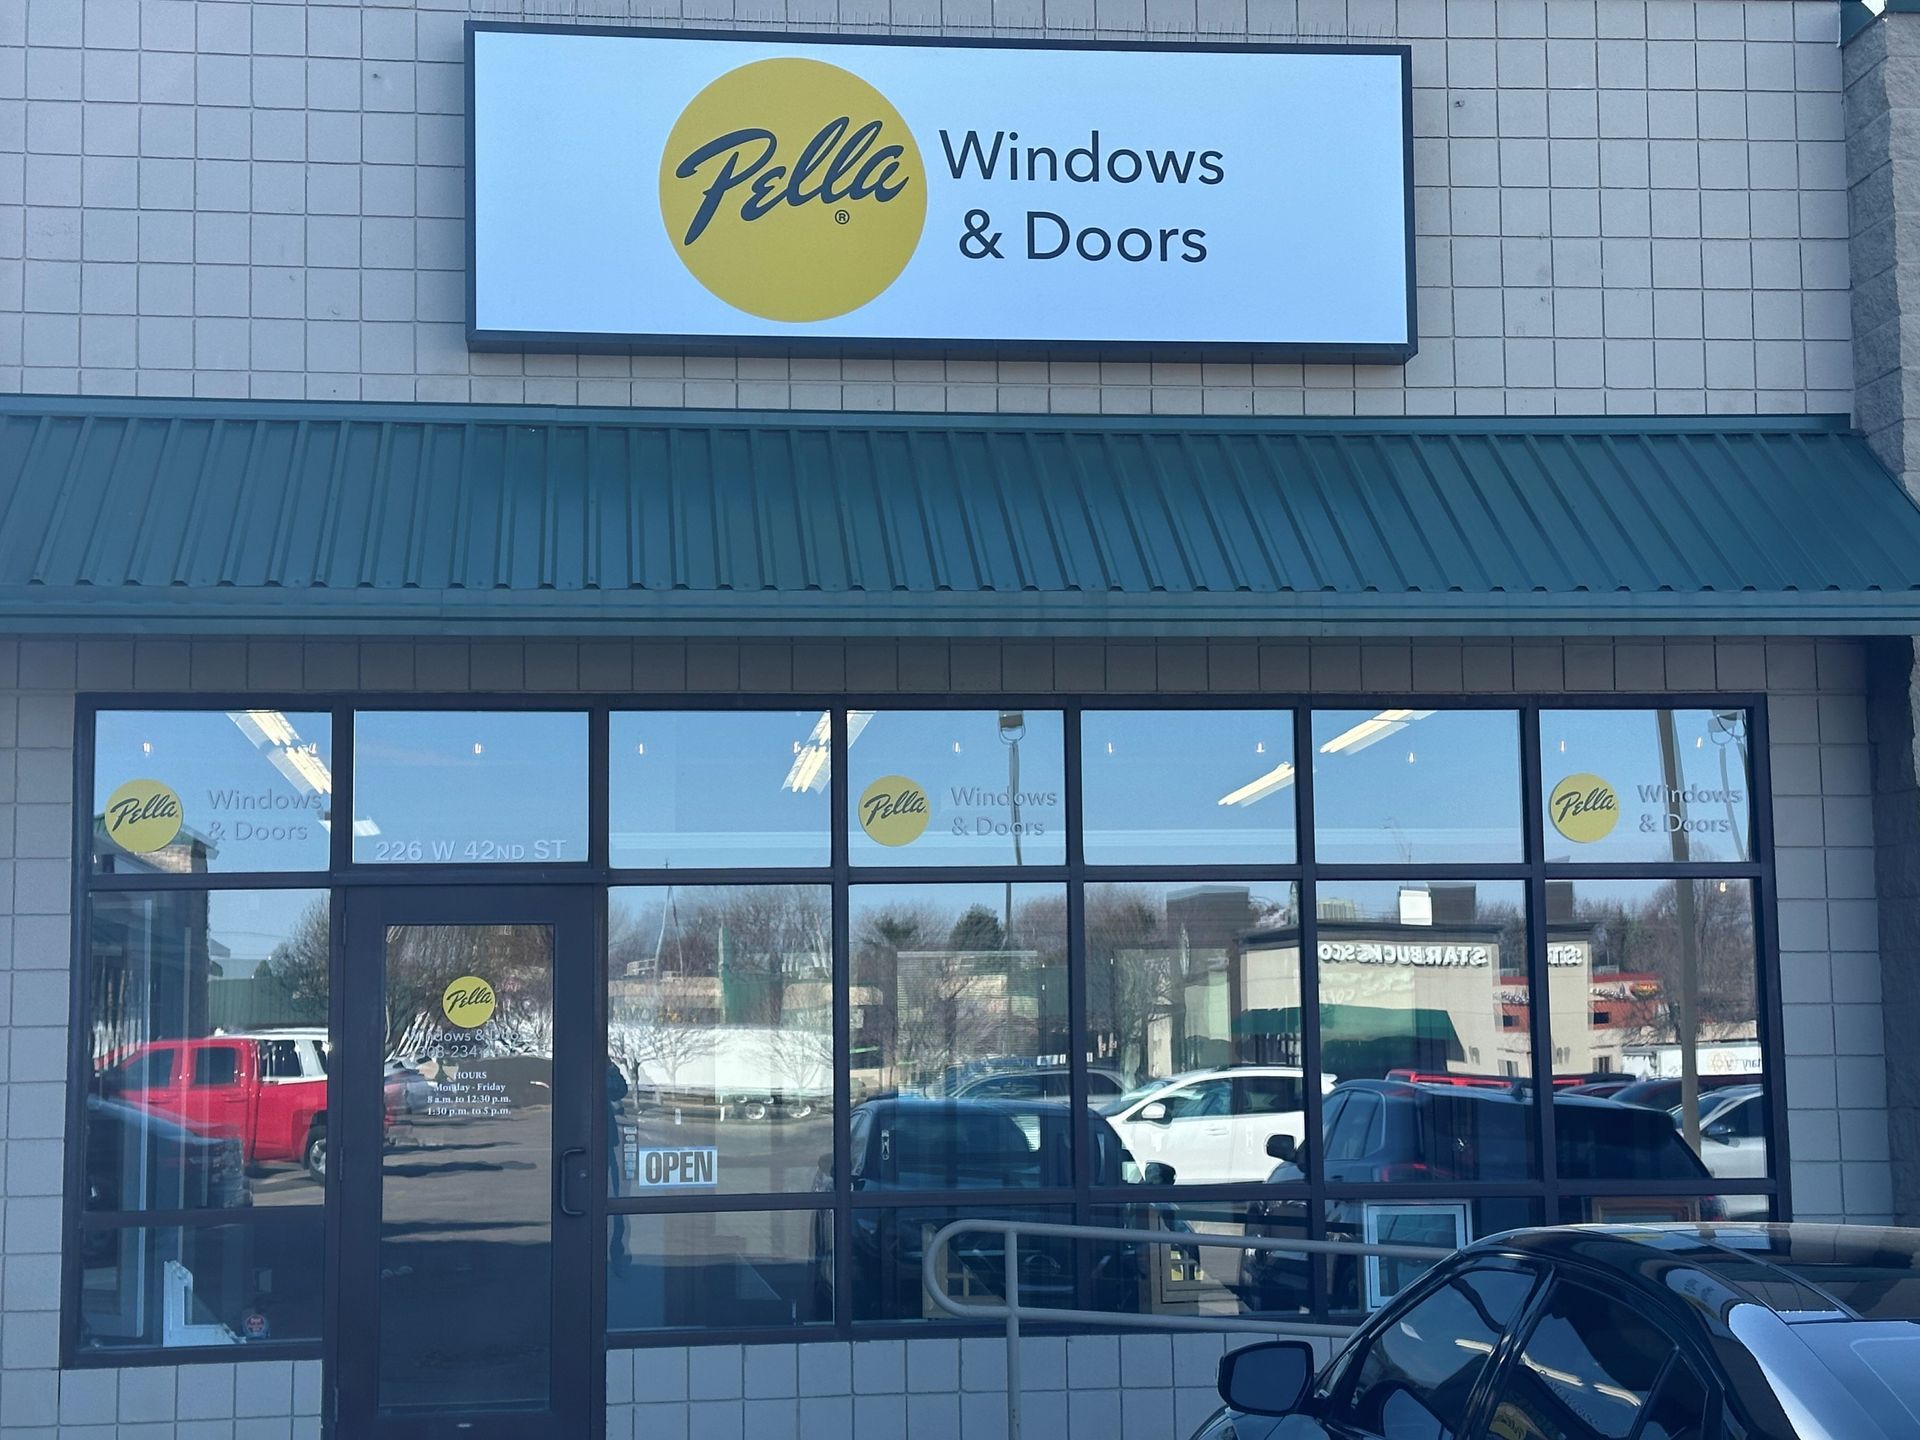 The front of a store that sells windows and doors